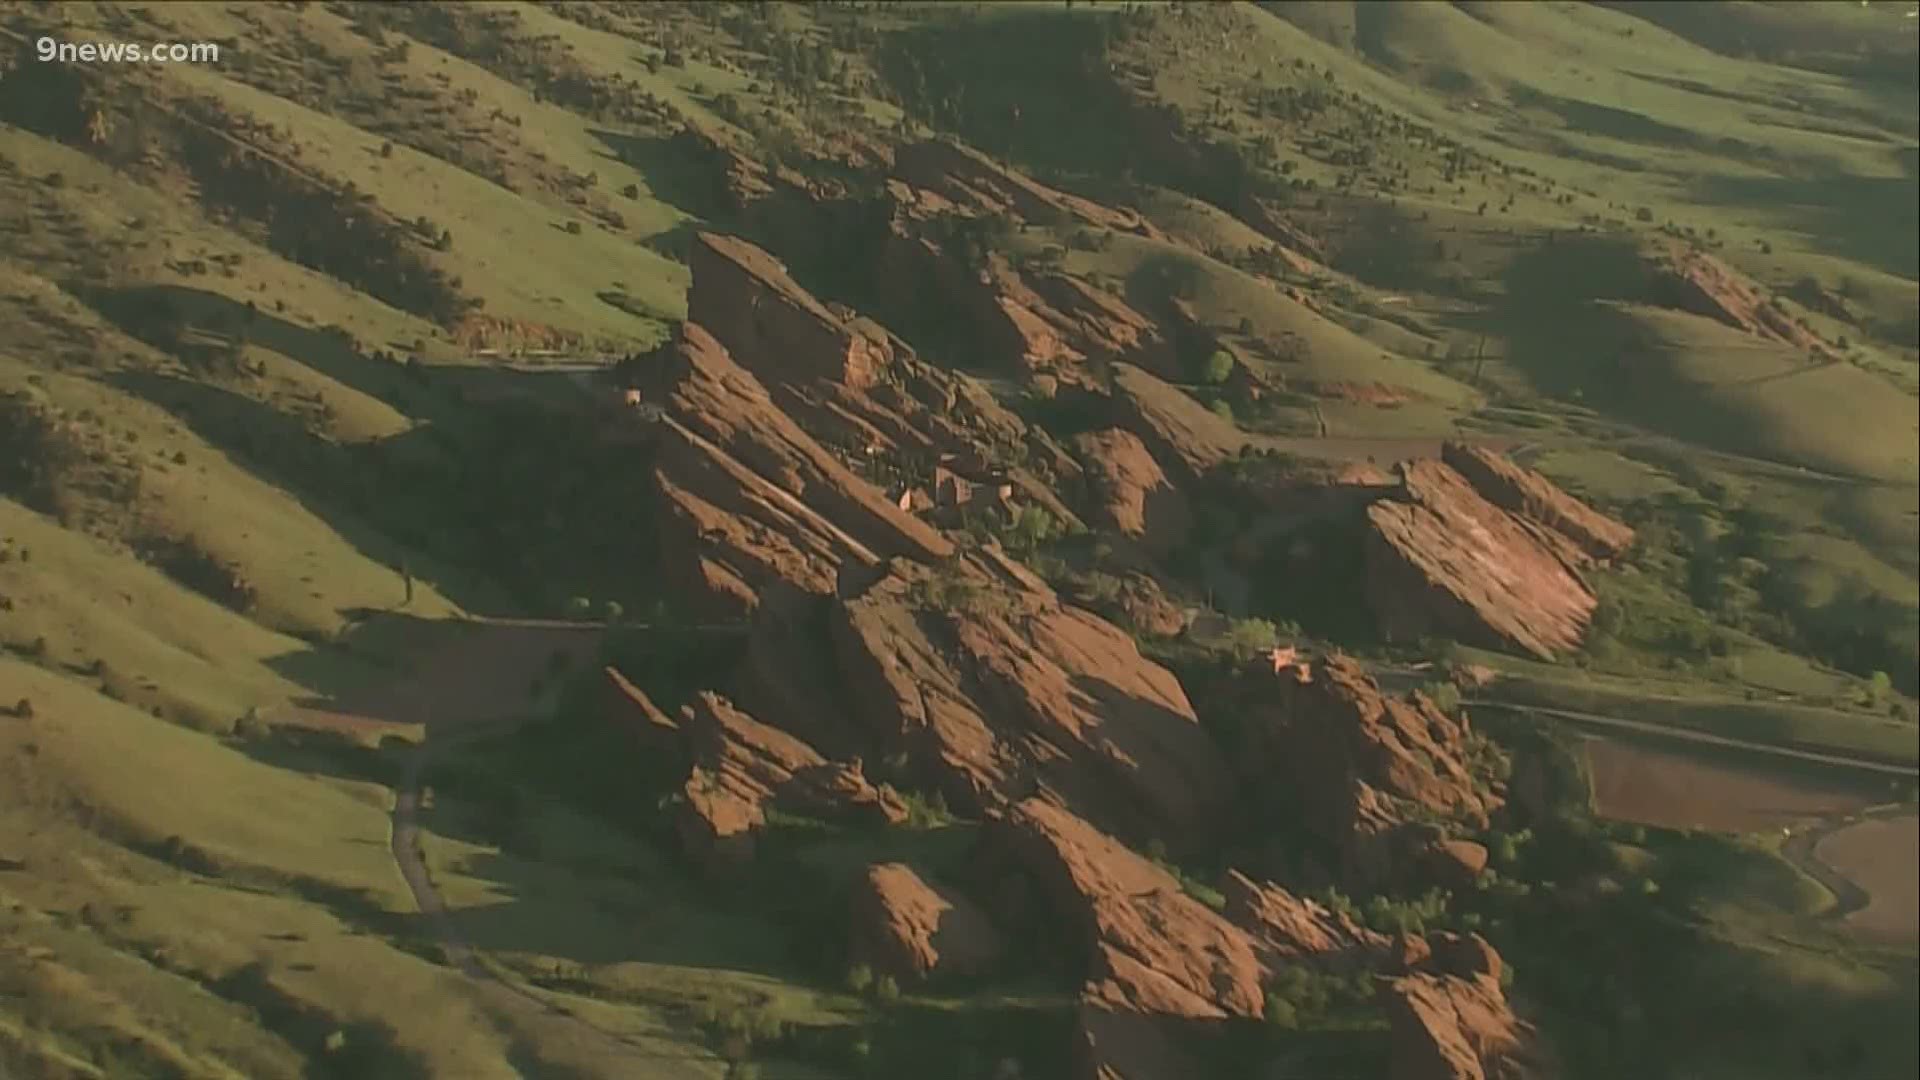 Red Rocks Park features 738 acres of hiking trails and geological wonders.